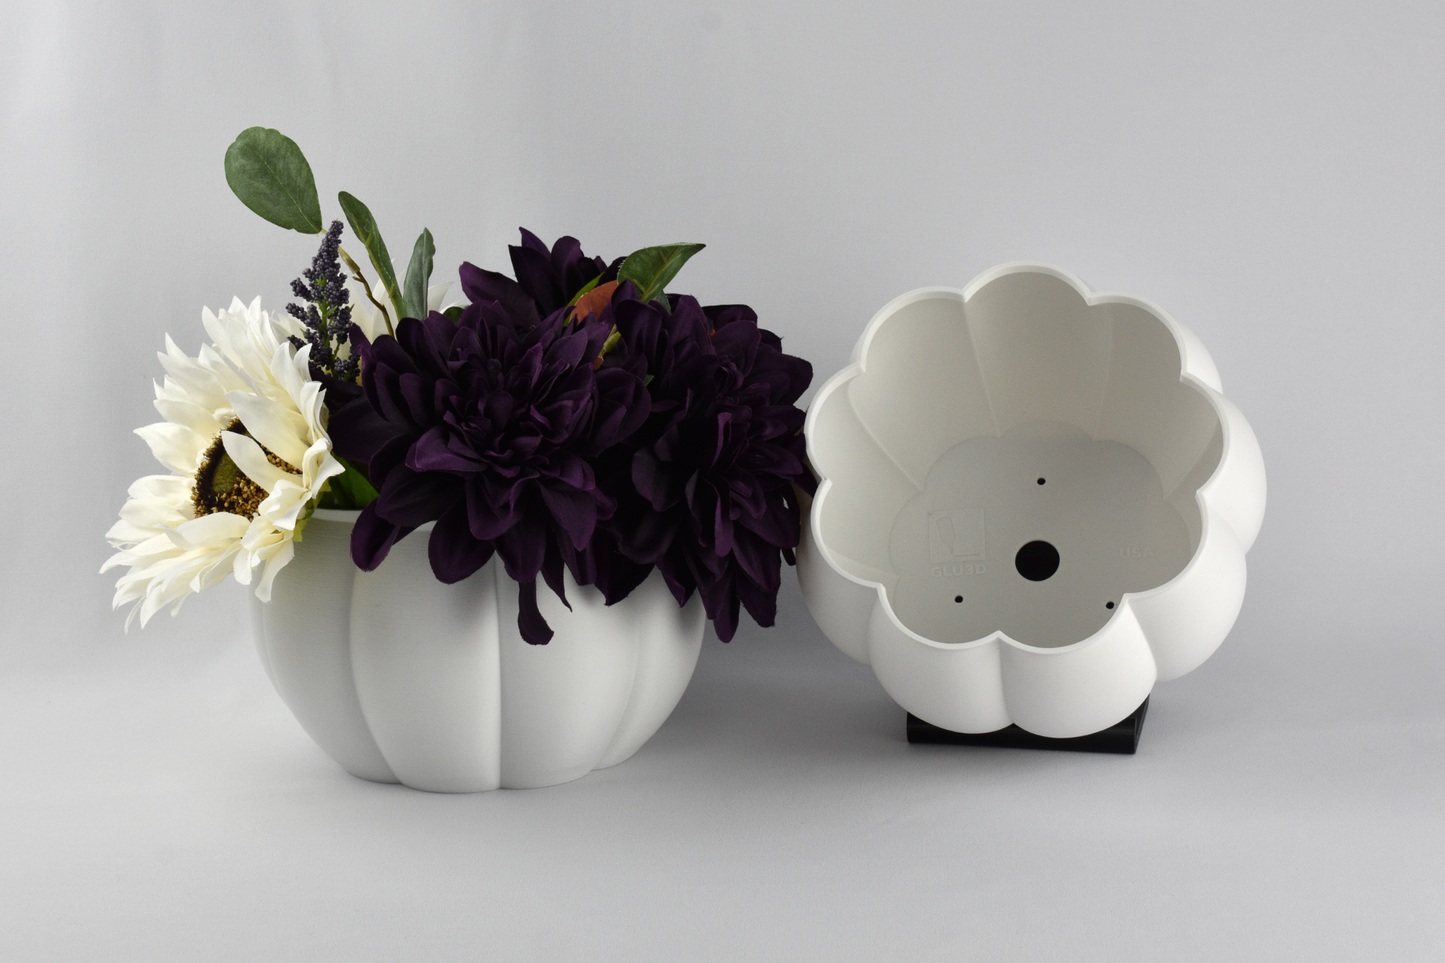 Matte White Pumpkin Planters, Size Large, For Fall Weddings, Baby Showers, Thanksgiving, Keepsake and Fall Decor